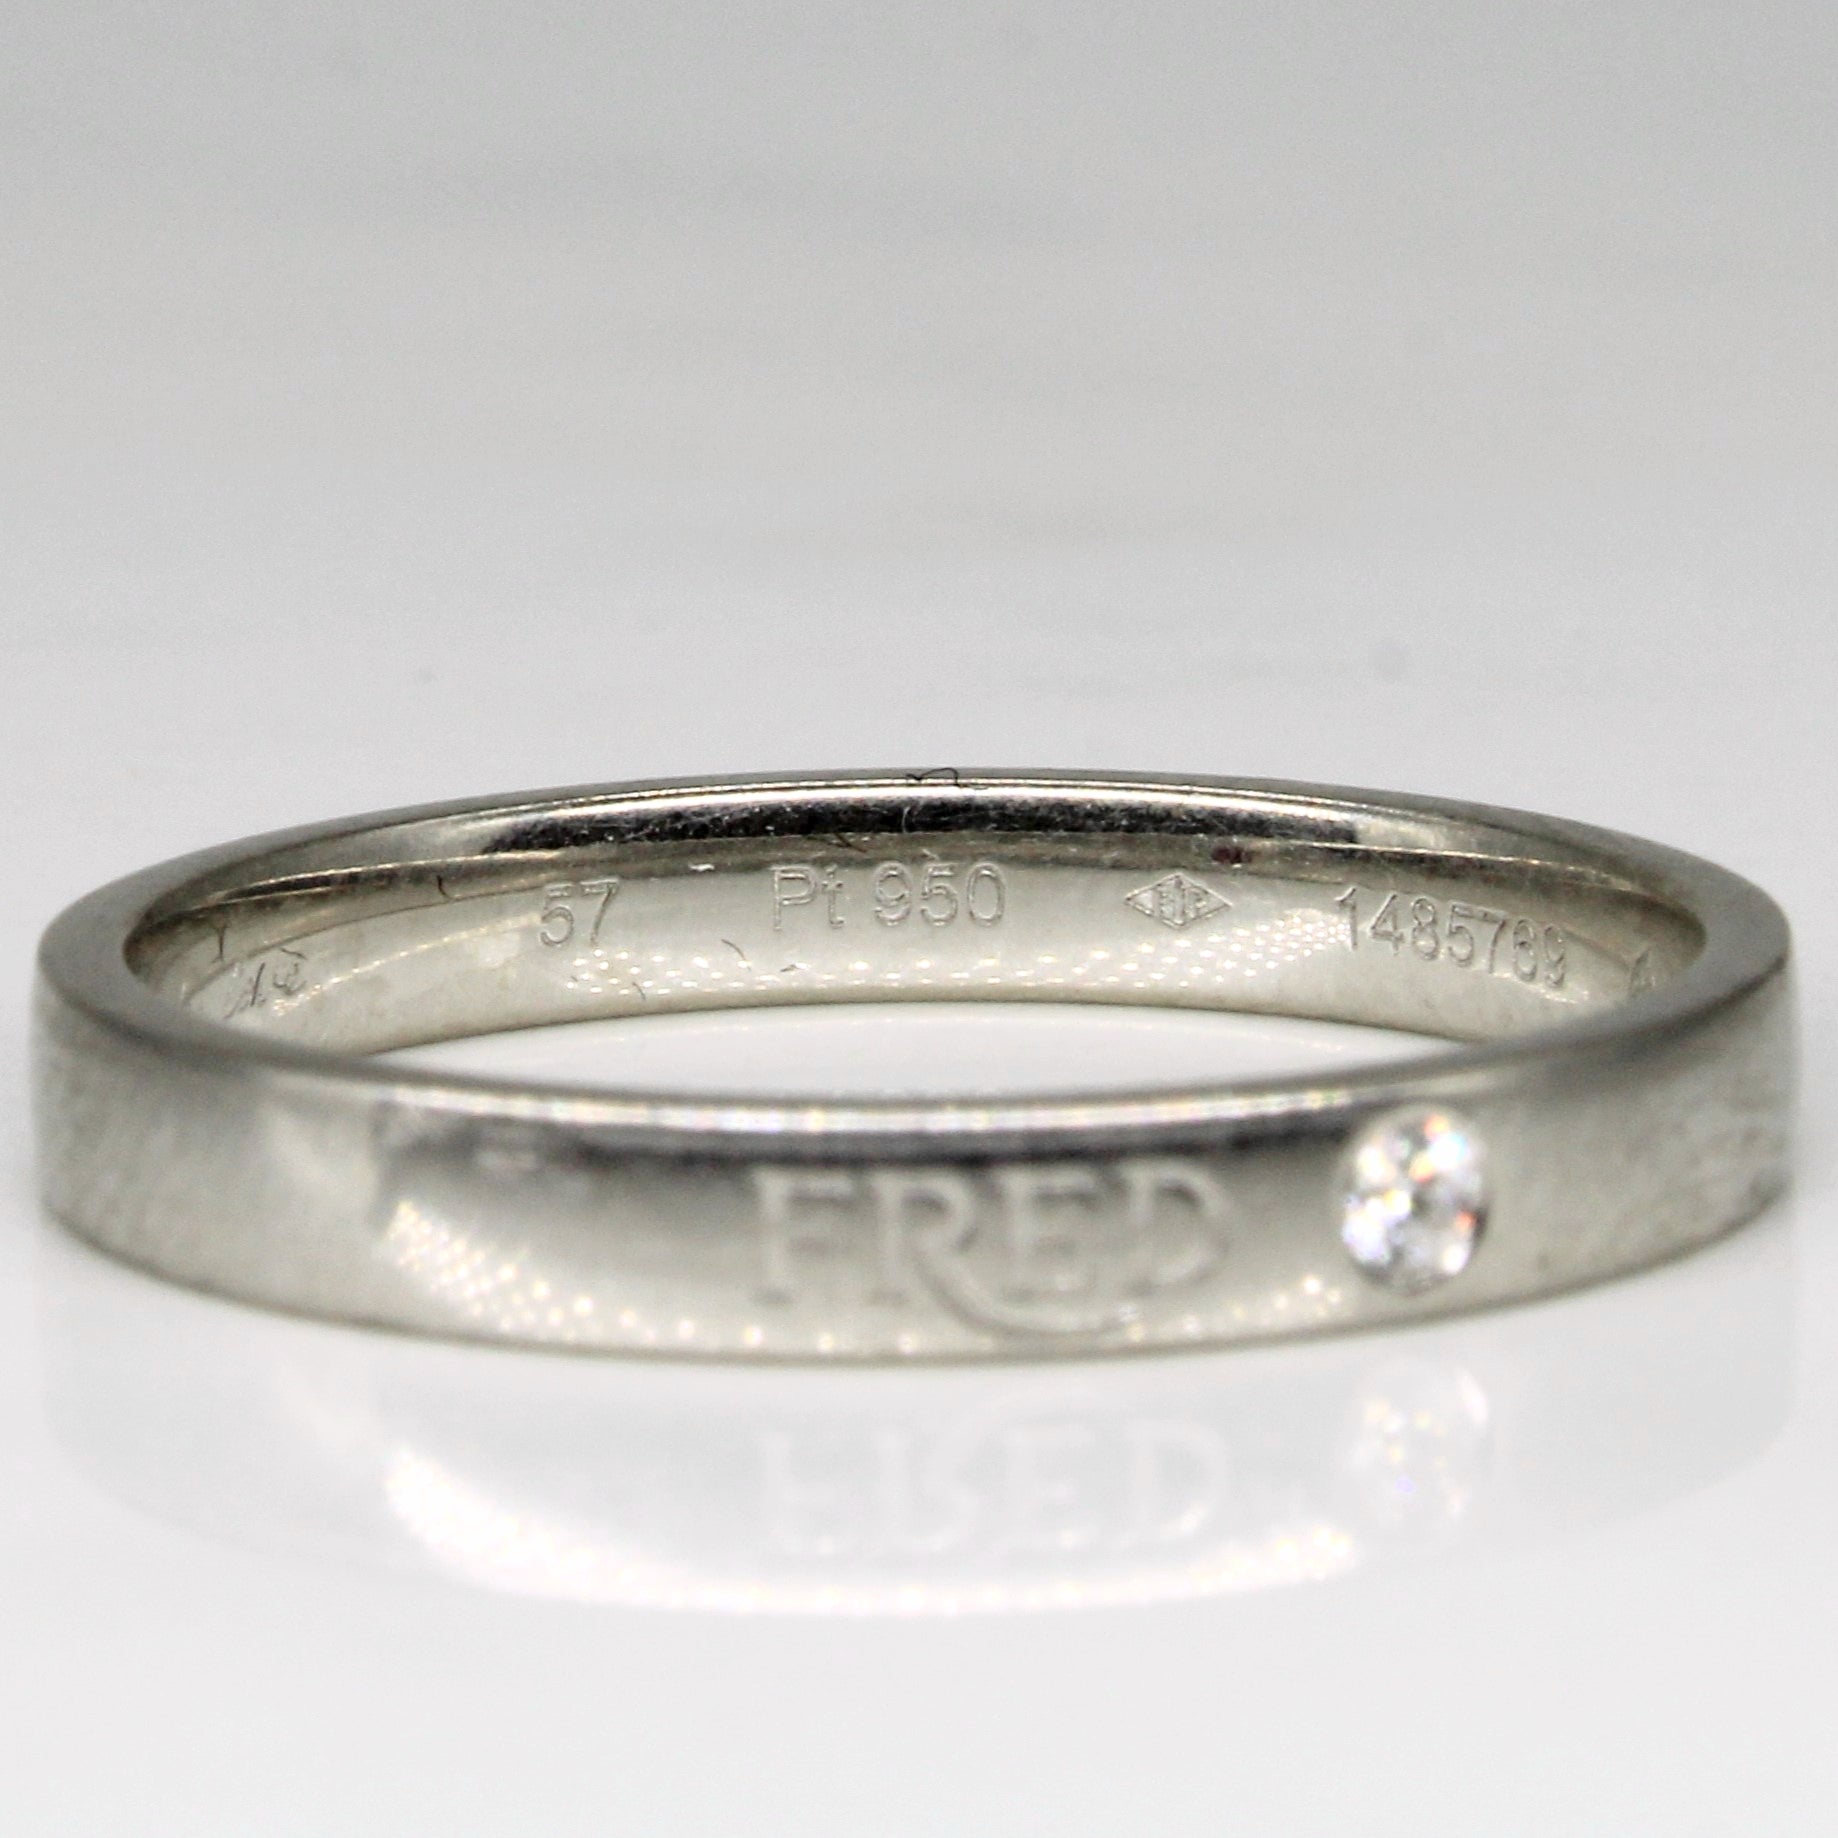 Fred For Love' Diamond & Ruby Love Wedding Band | 0.03ct, 0.03ct | SZ 8 |